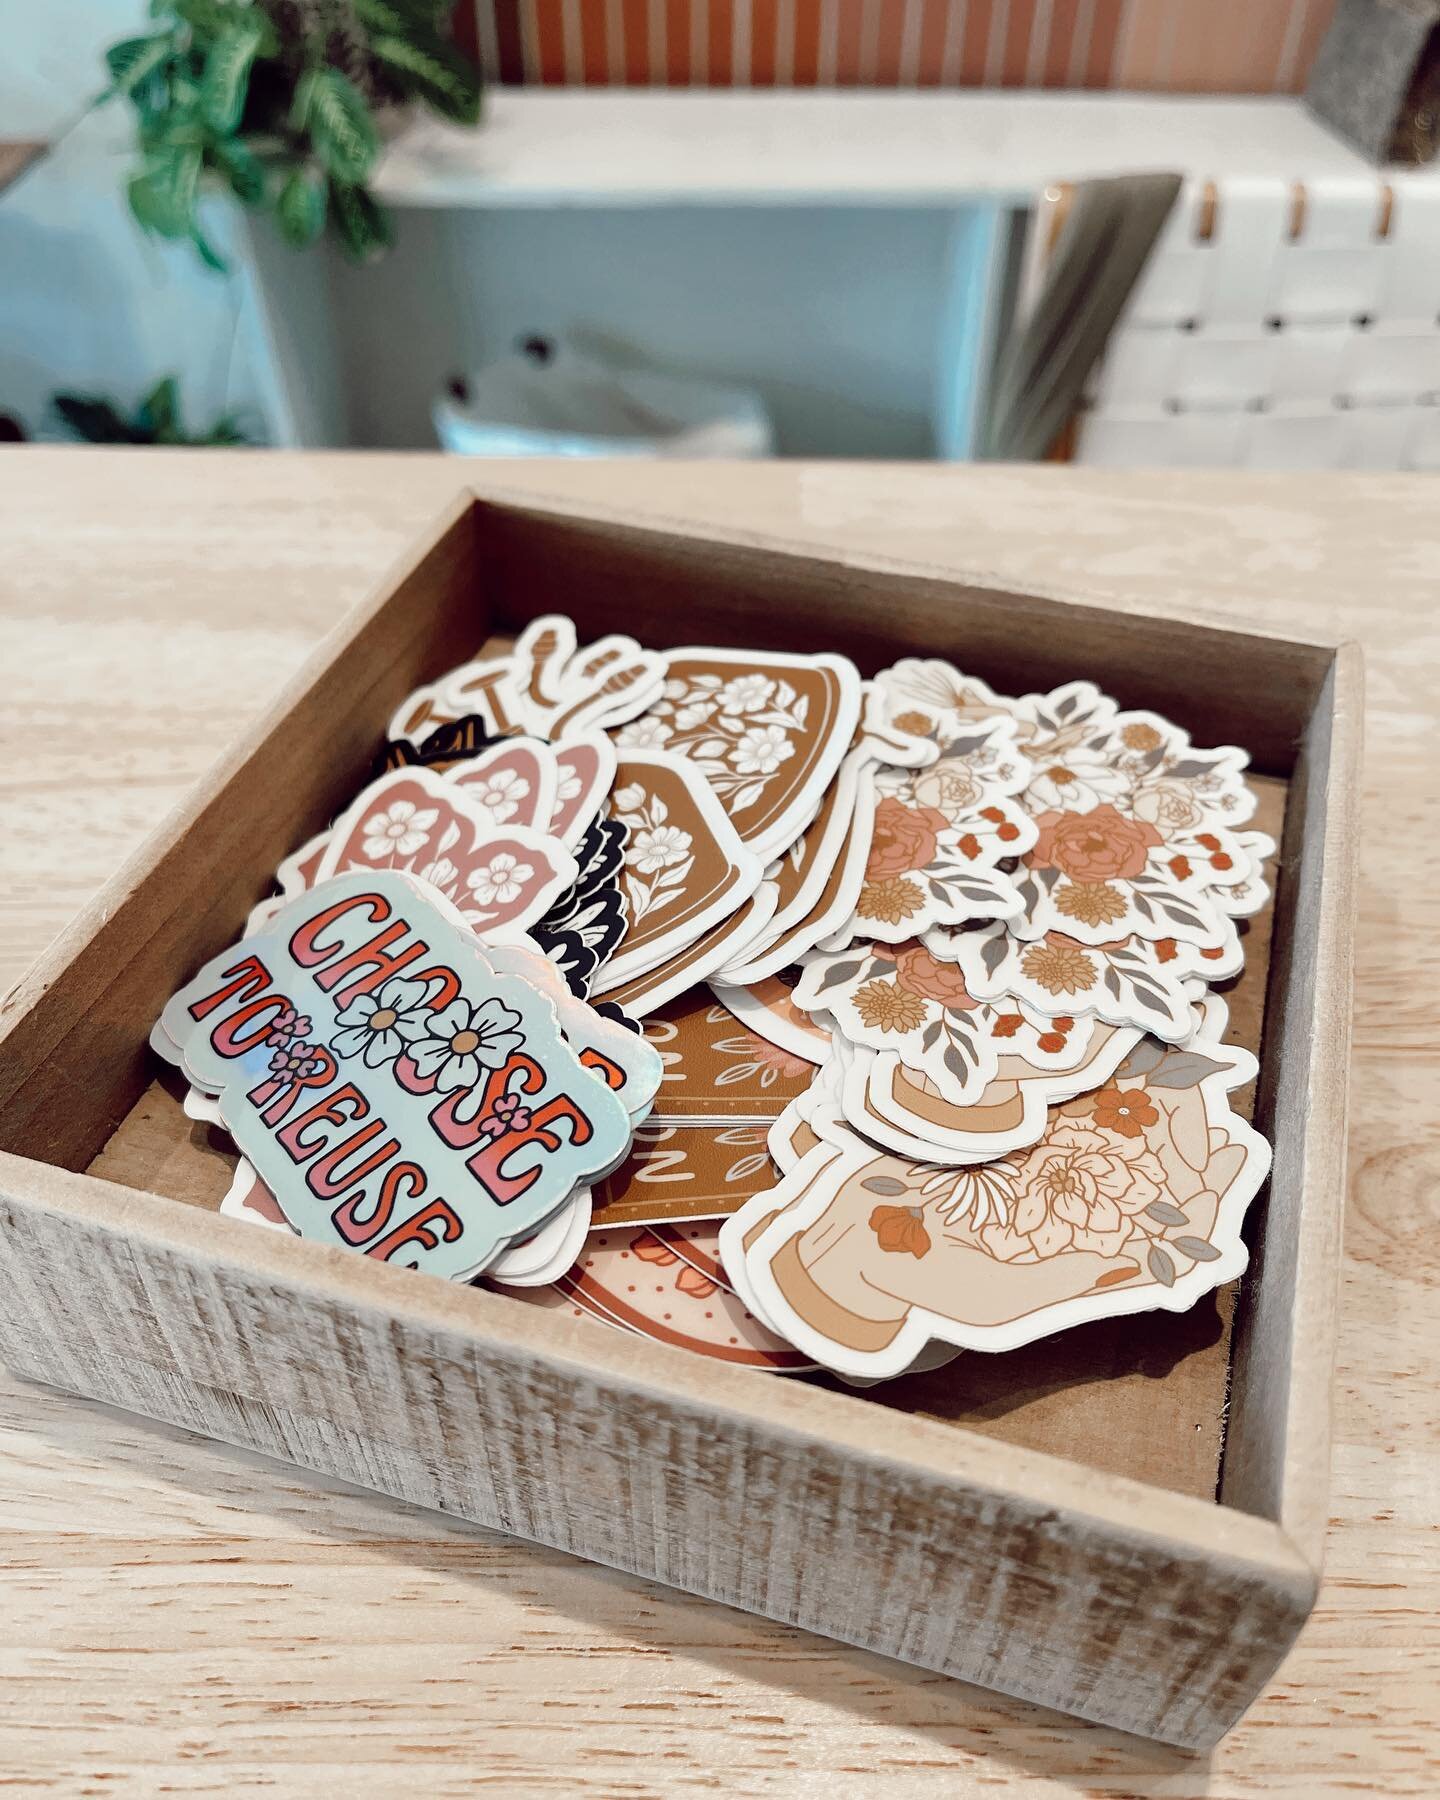 We may be a bit biased, but we got in the CUTEST stickers from @florawestdesign &amp; we&rsquo;re pretty obsessed 🤩✨

These are made from high quality, durable vinyl. They is scratch proof, water proof, and weather proof. They can even safely go thr